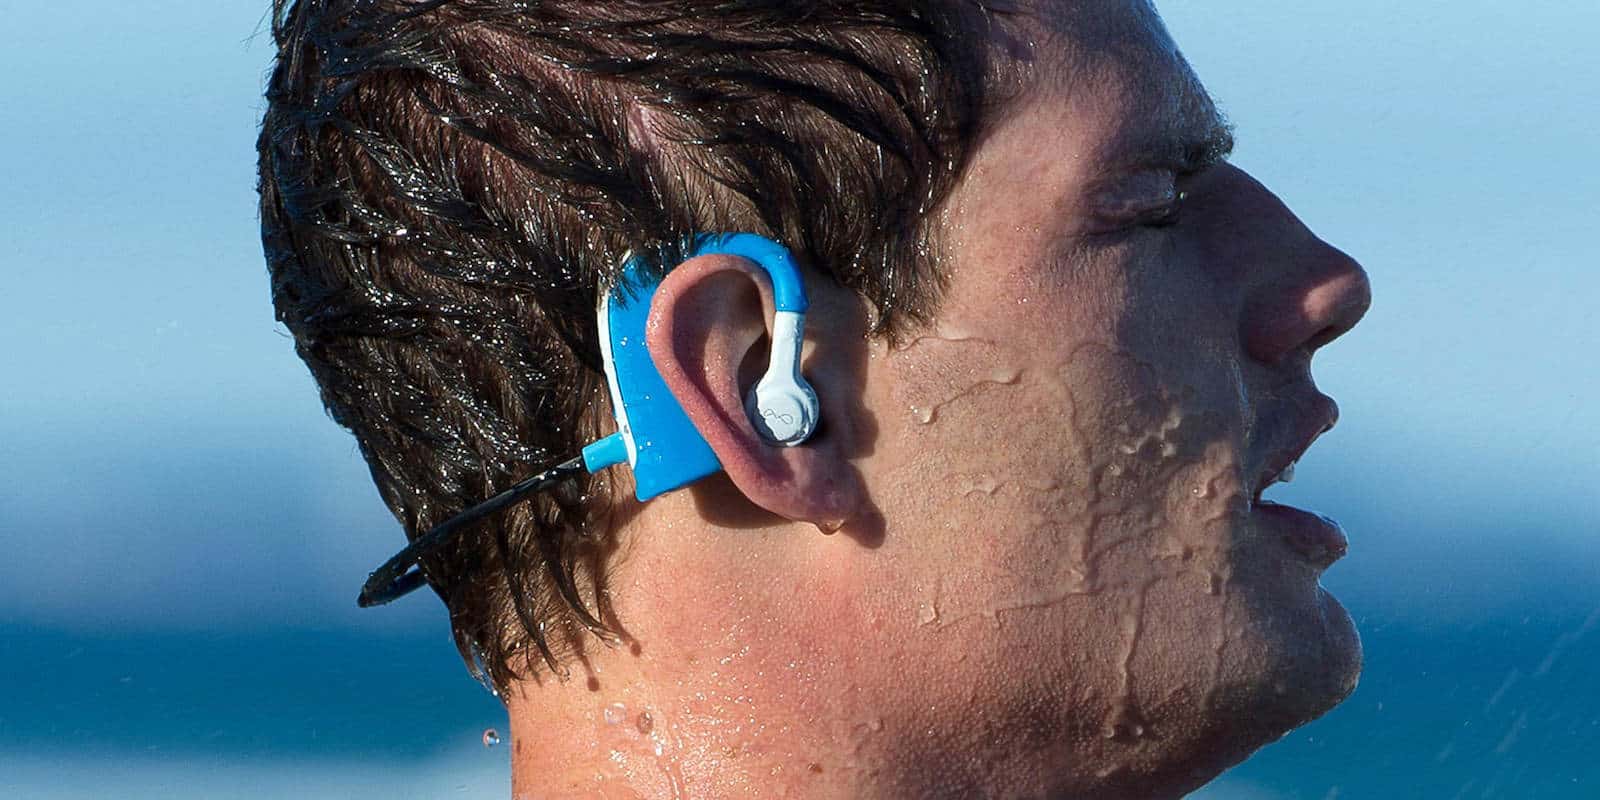 Do you go hard at the gym? These earbuds are designed to keep up.